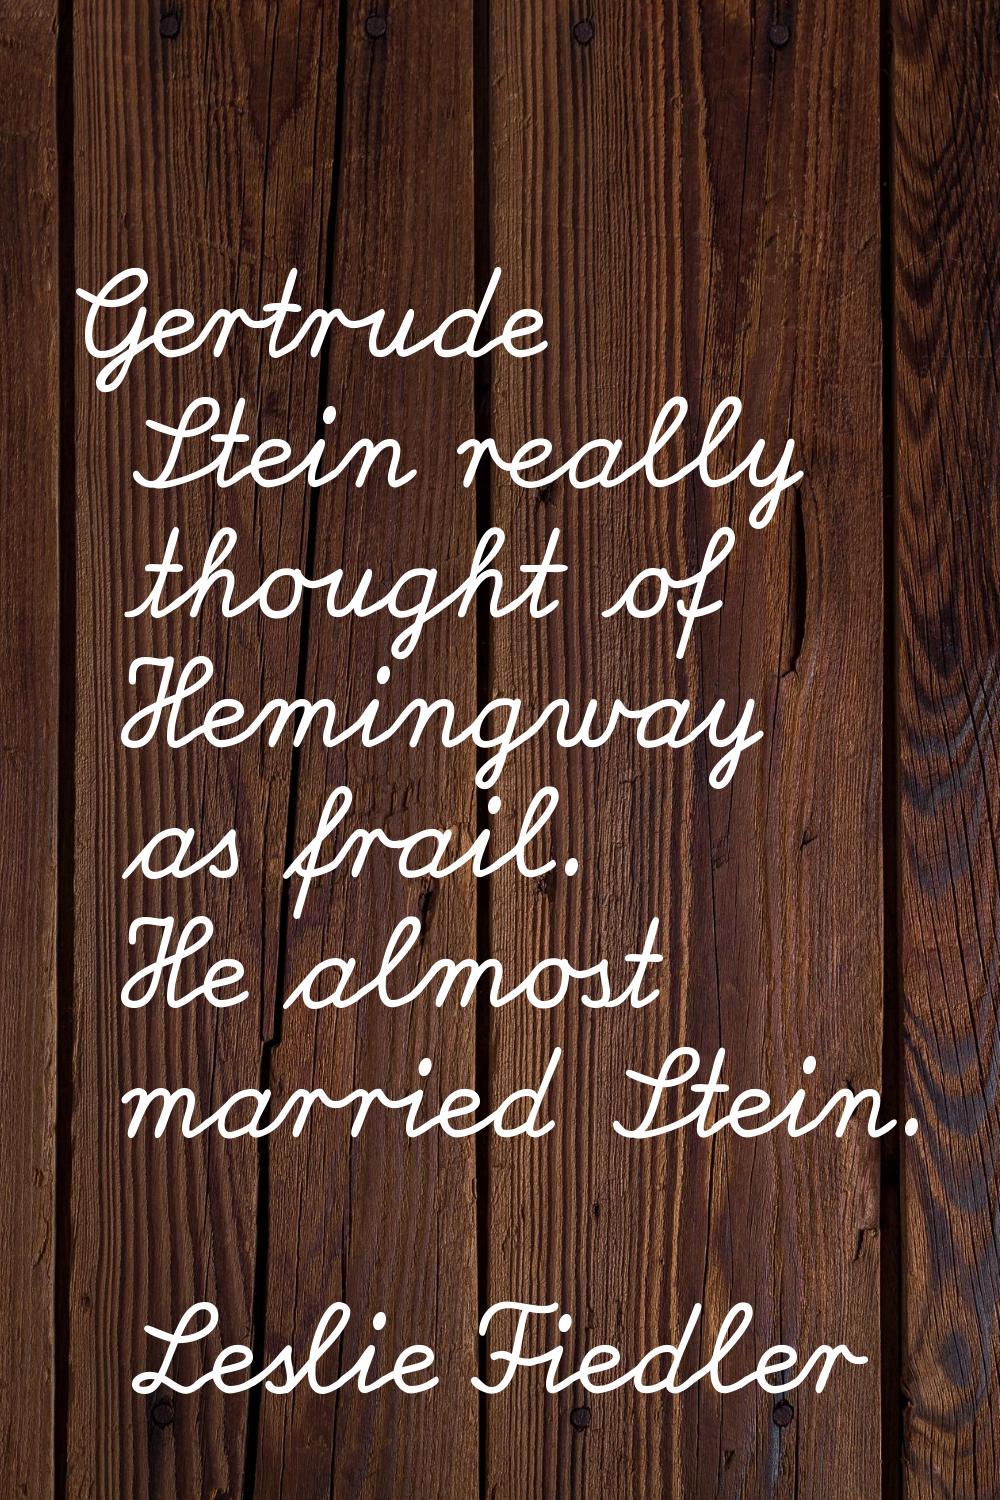 Gertrude Stein really thought of Hemingway as frail. He almost married Stein.